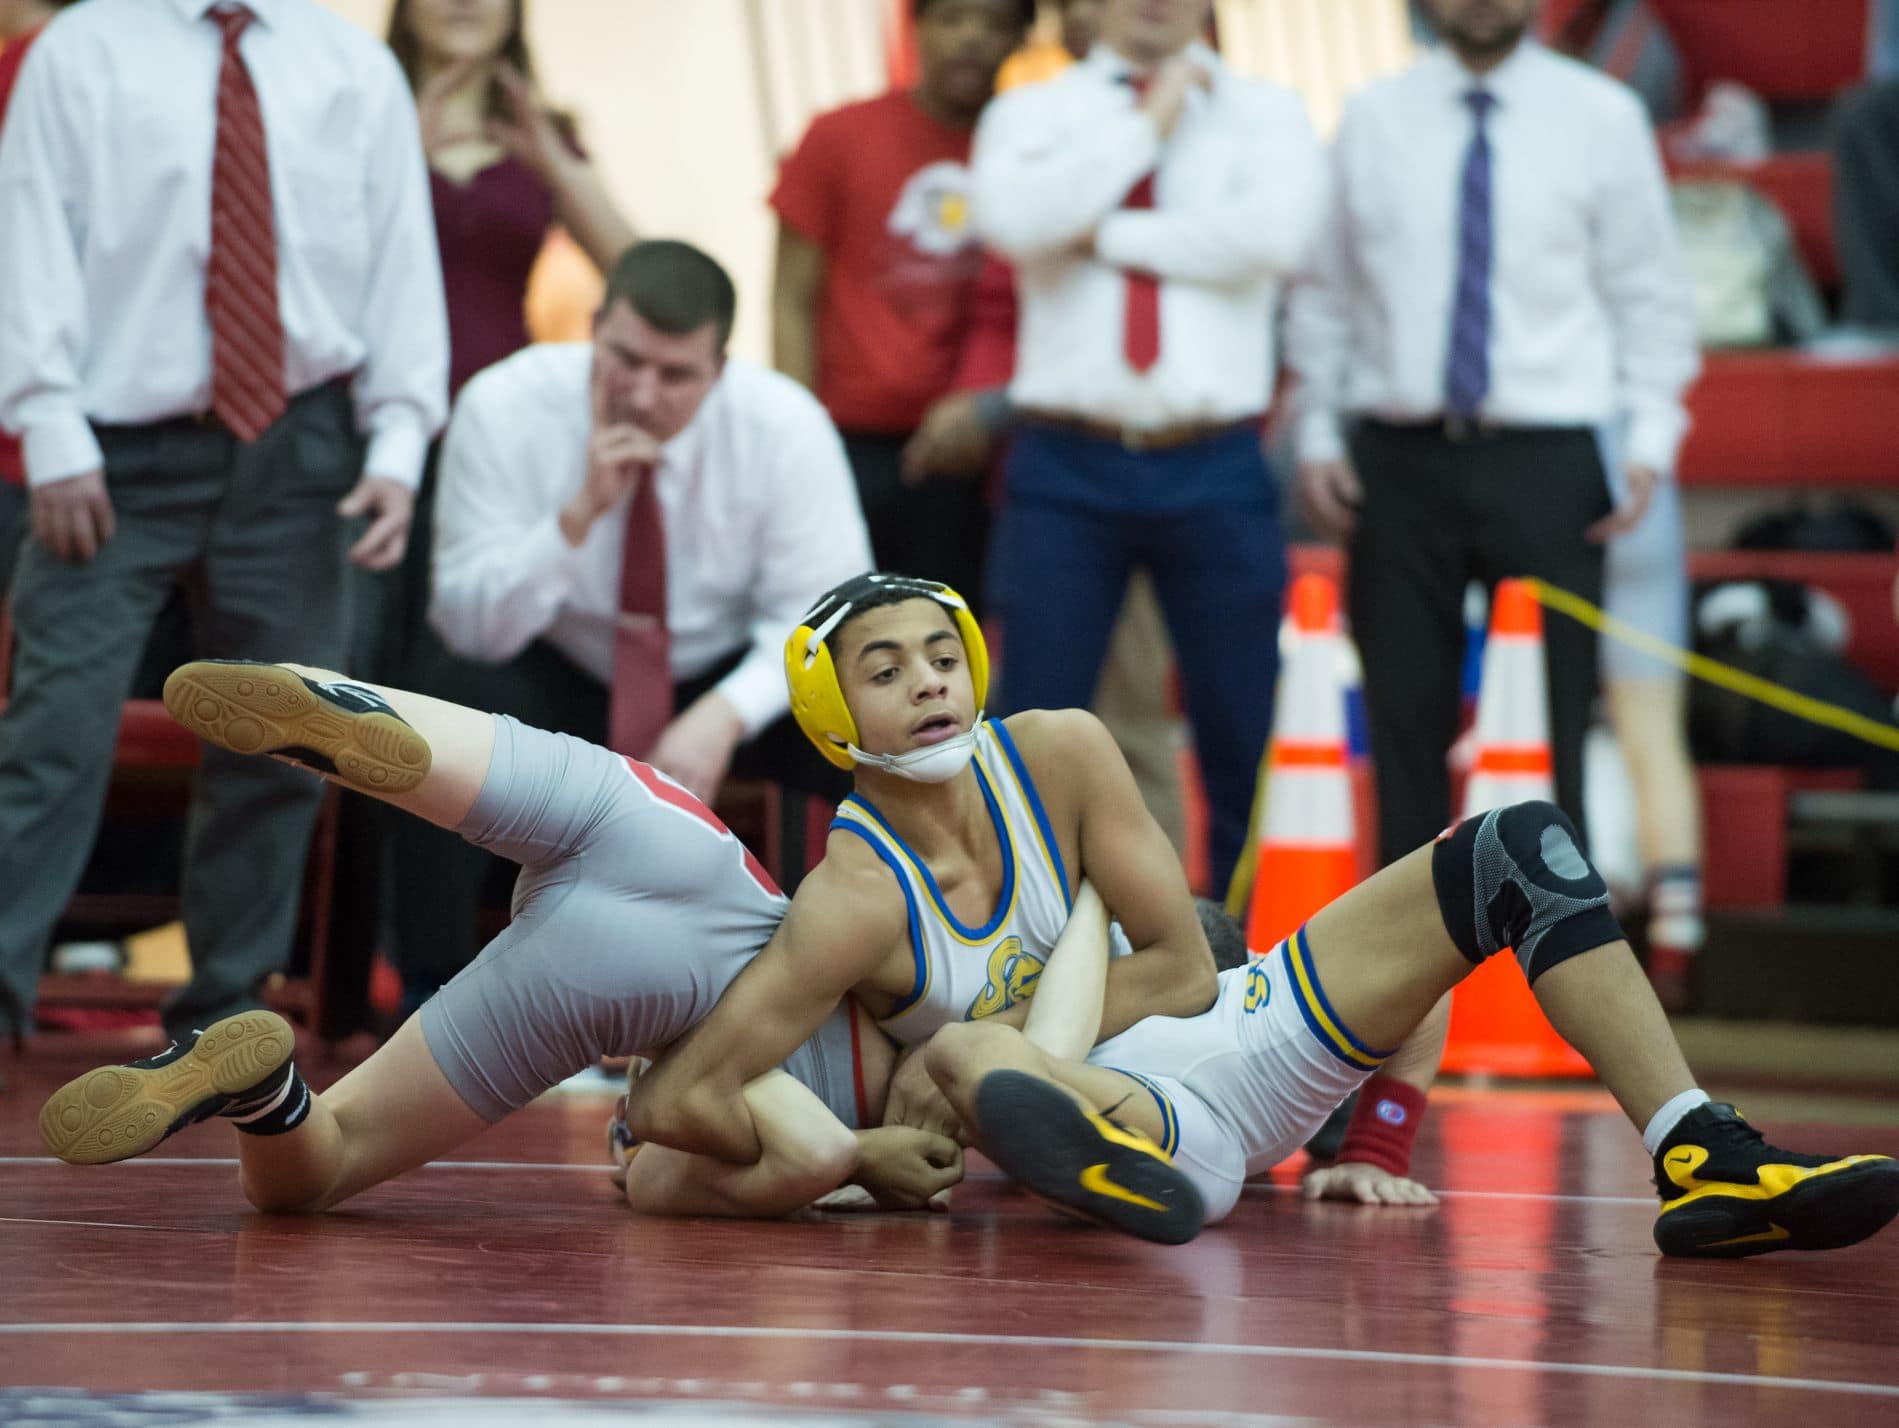 Sussex Central's Javon Saffold put Smyrna's Dylan Andruzzi into a hold in the 106 pound match at DIAA Dual Meet Wrestling State Championship at Smyrna High School.